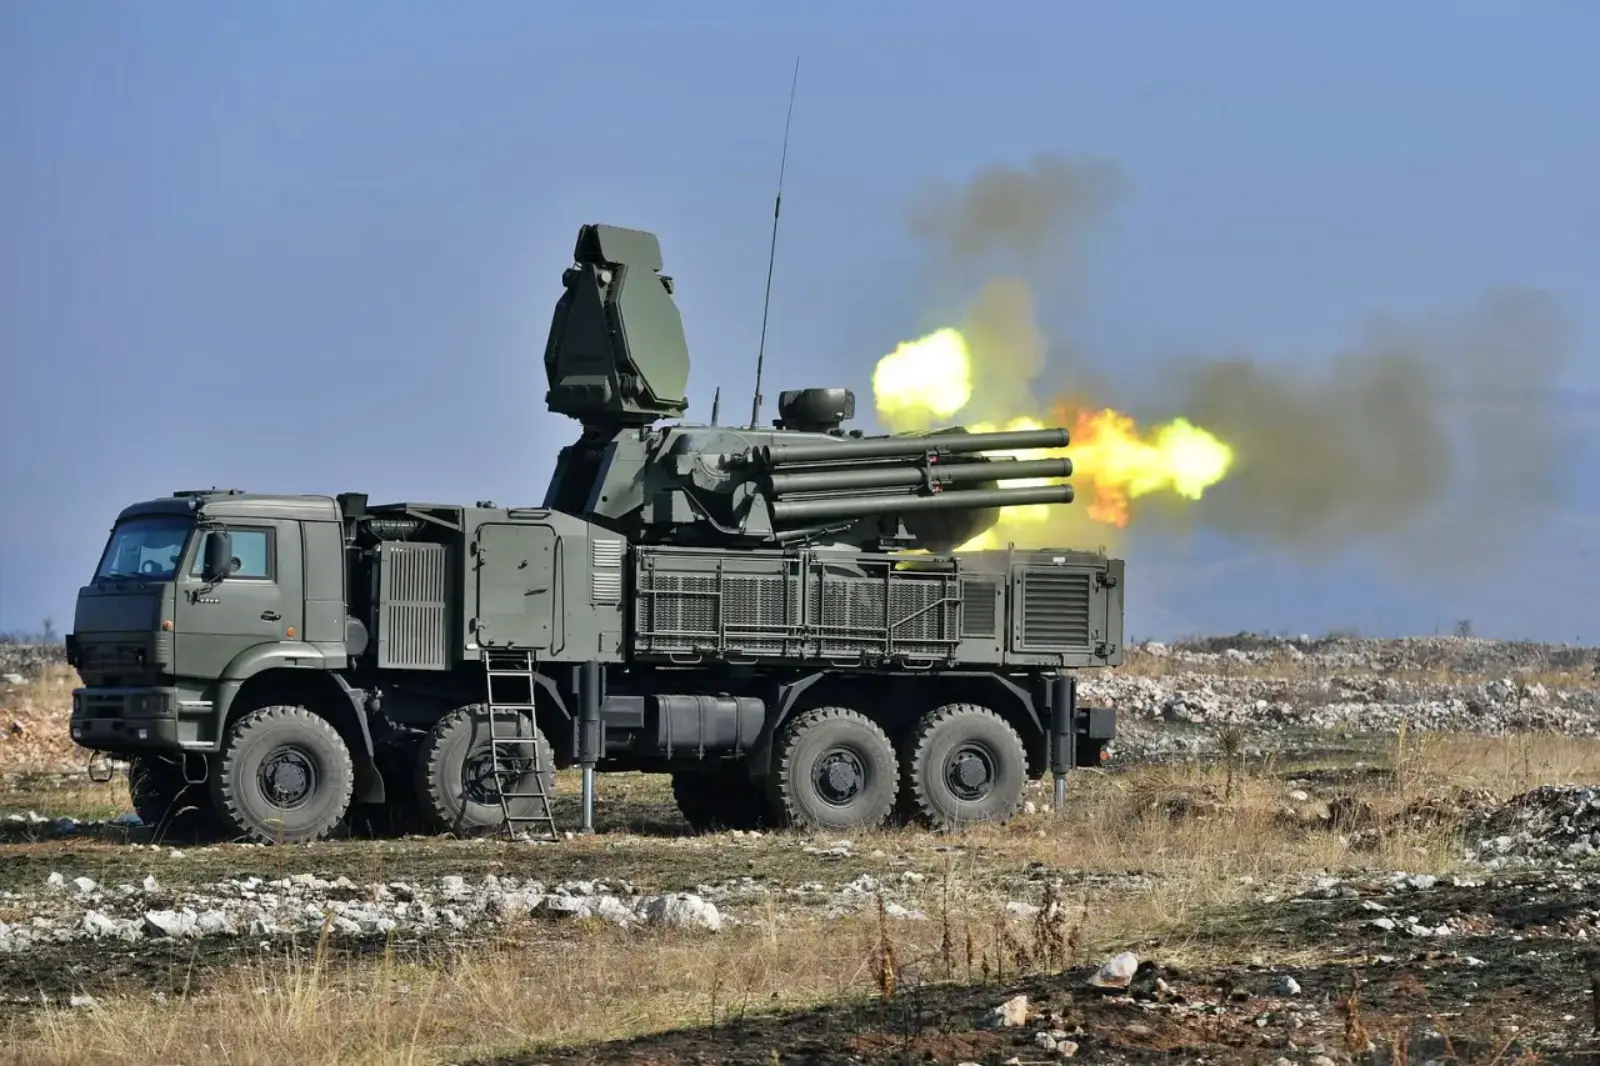 VIDEO A Russian Air Defense System Attacks Russian Soldiers